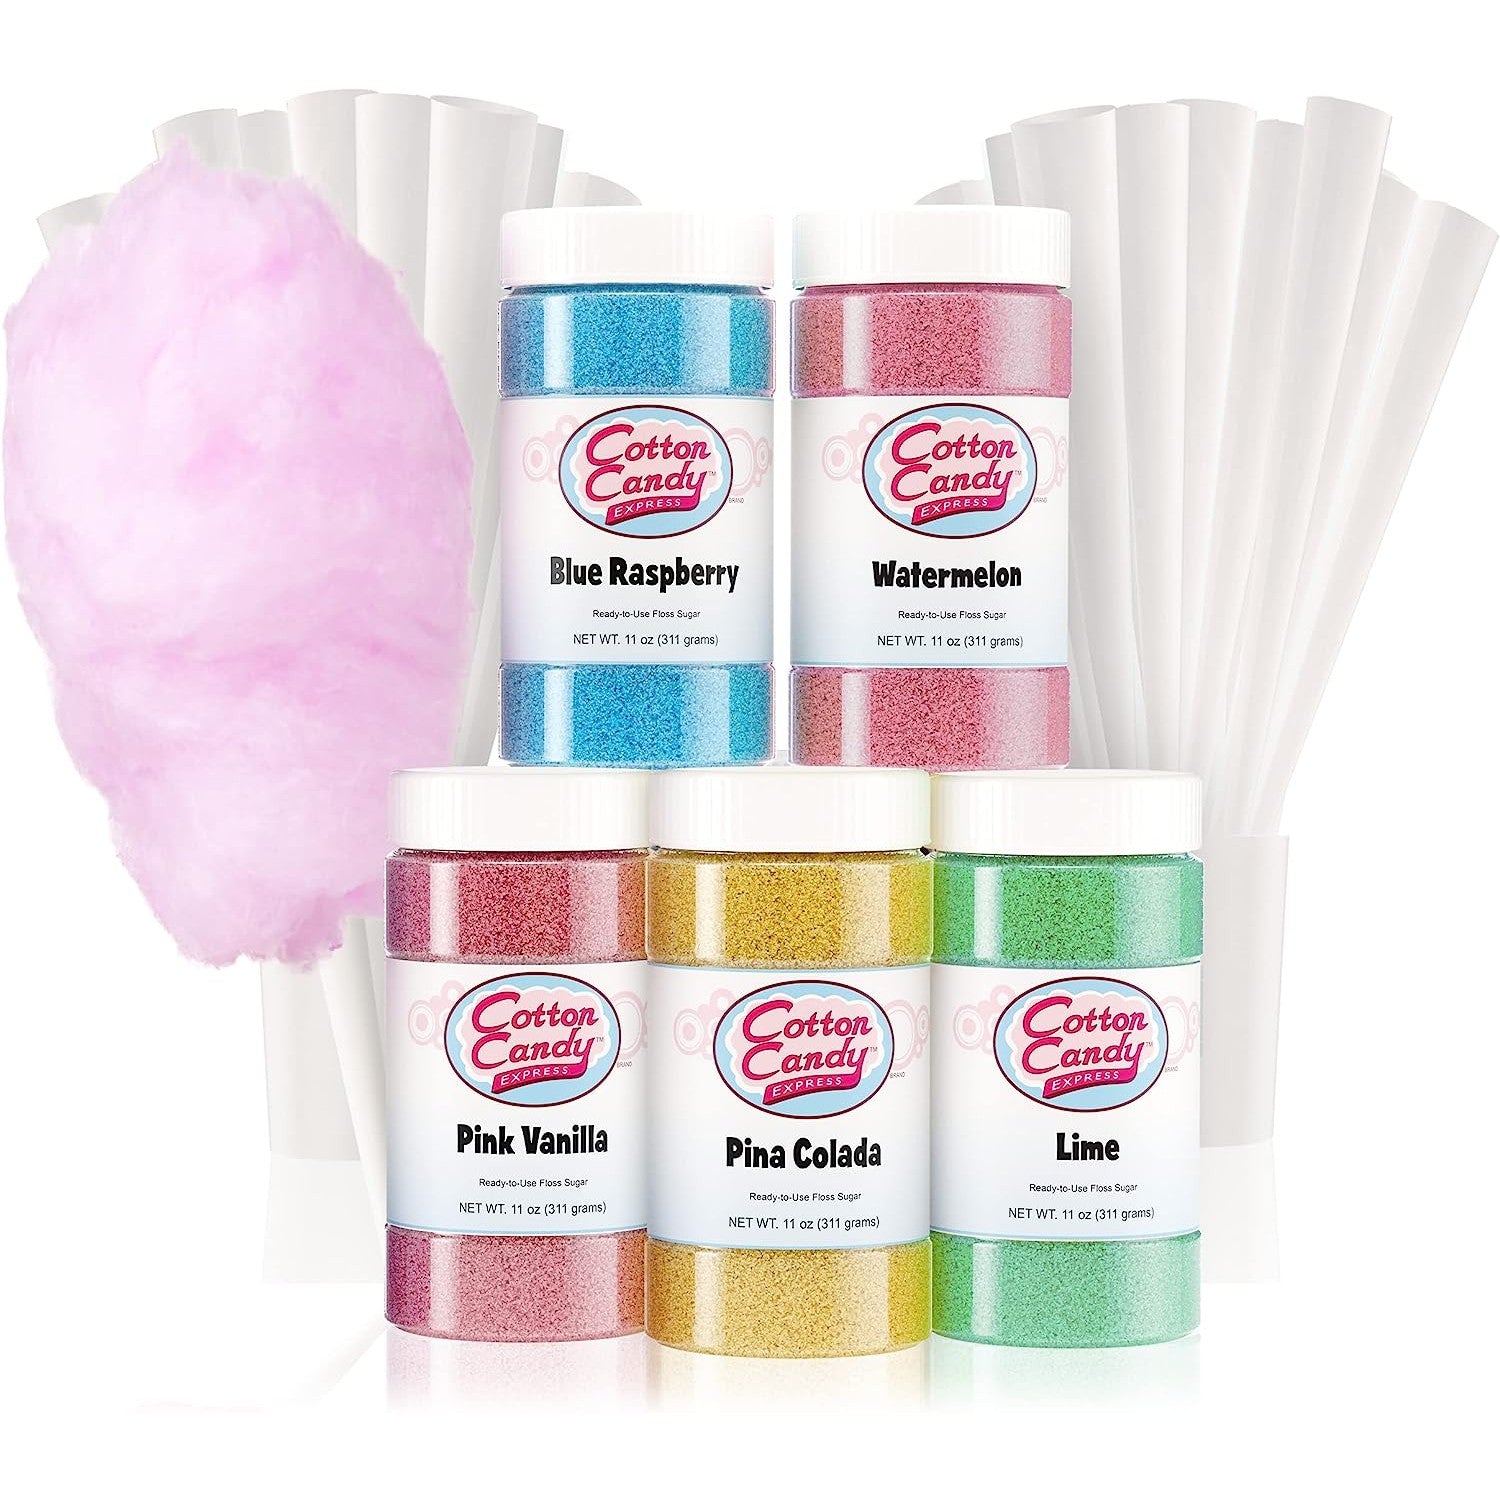 A cotton candy sugar variety pack.